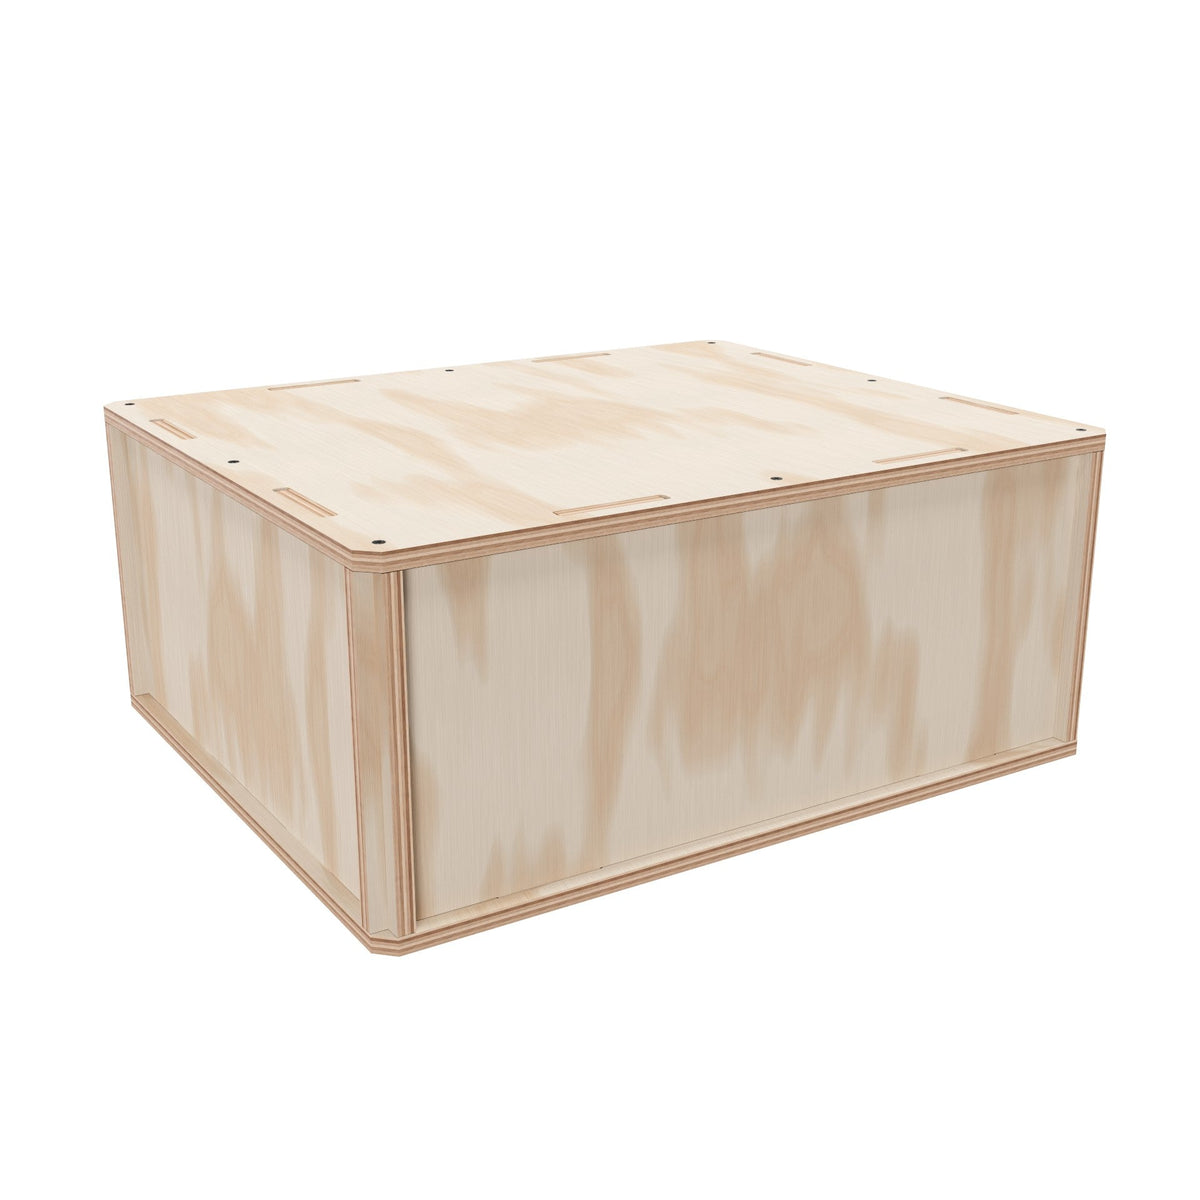 Plywood Shipping Crate 24x20x10